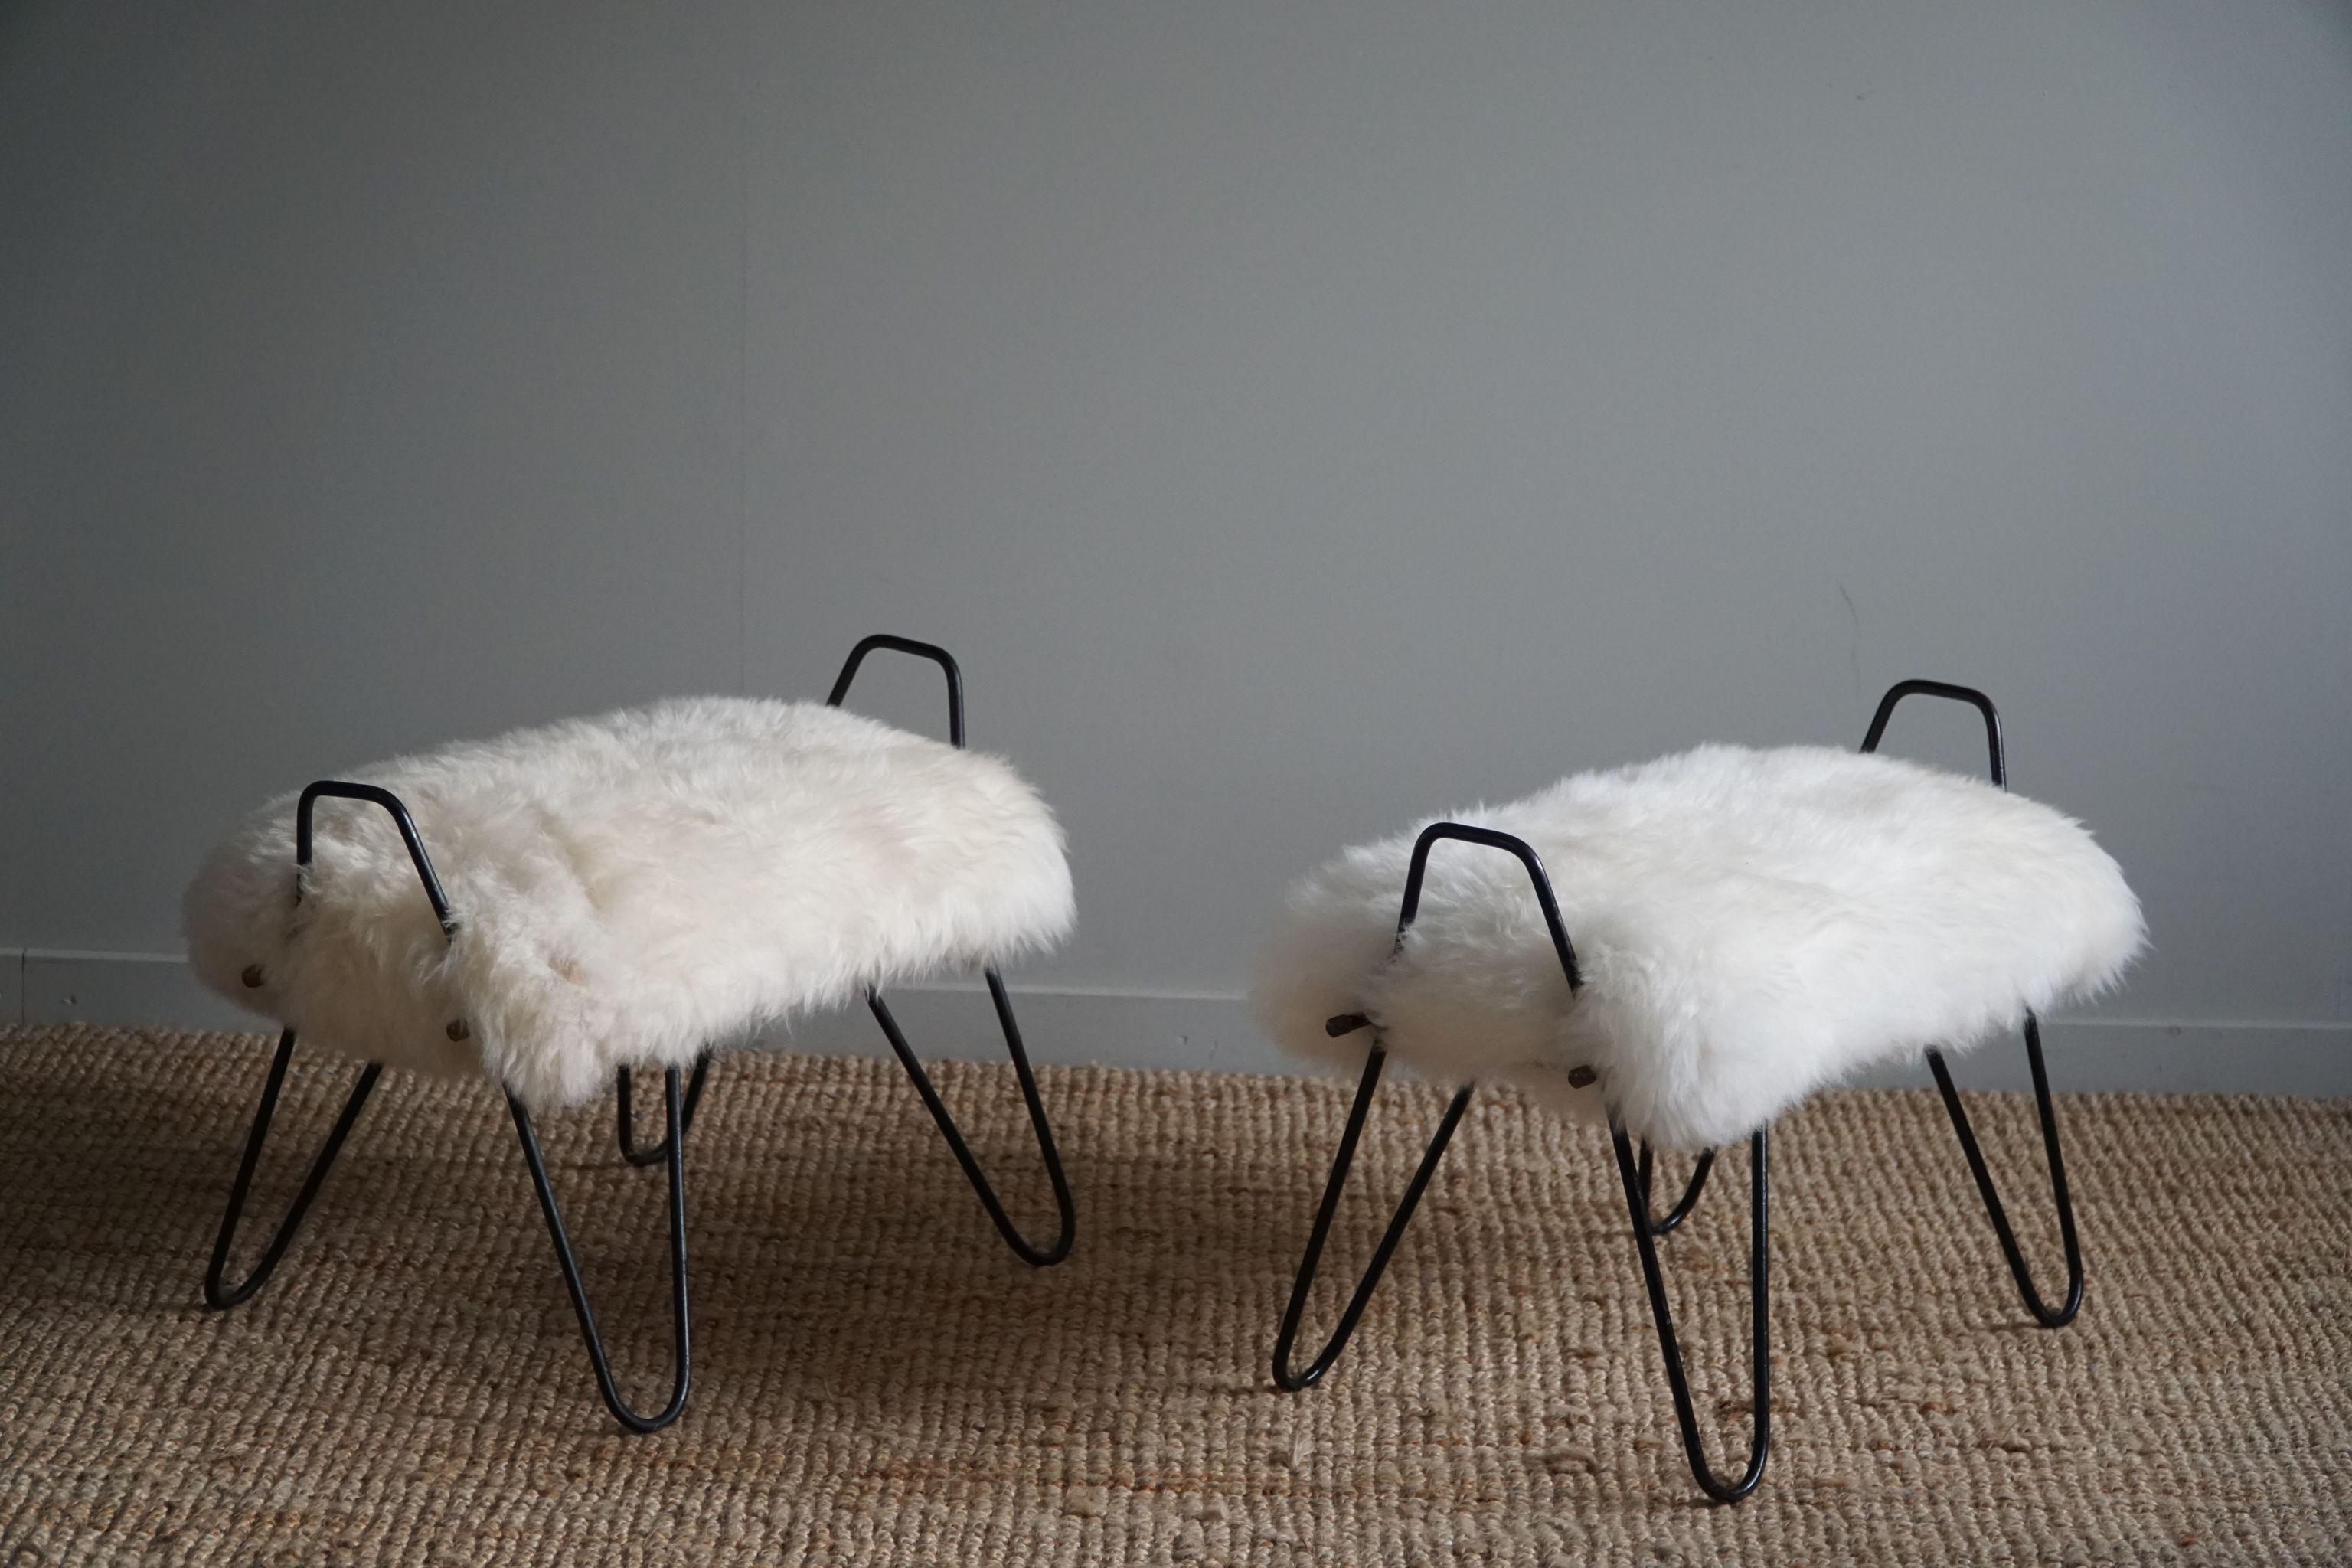 A Pair of Stools in Steel and Icelandic Lambswool, Mid Century Modern, 1960s For Sale 14